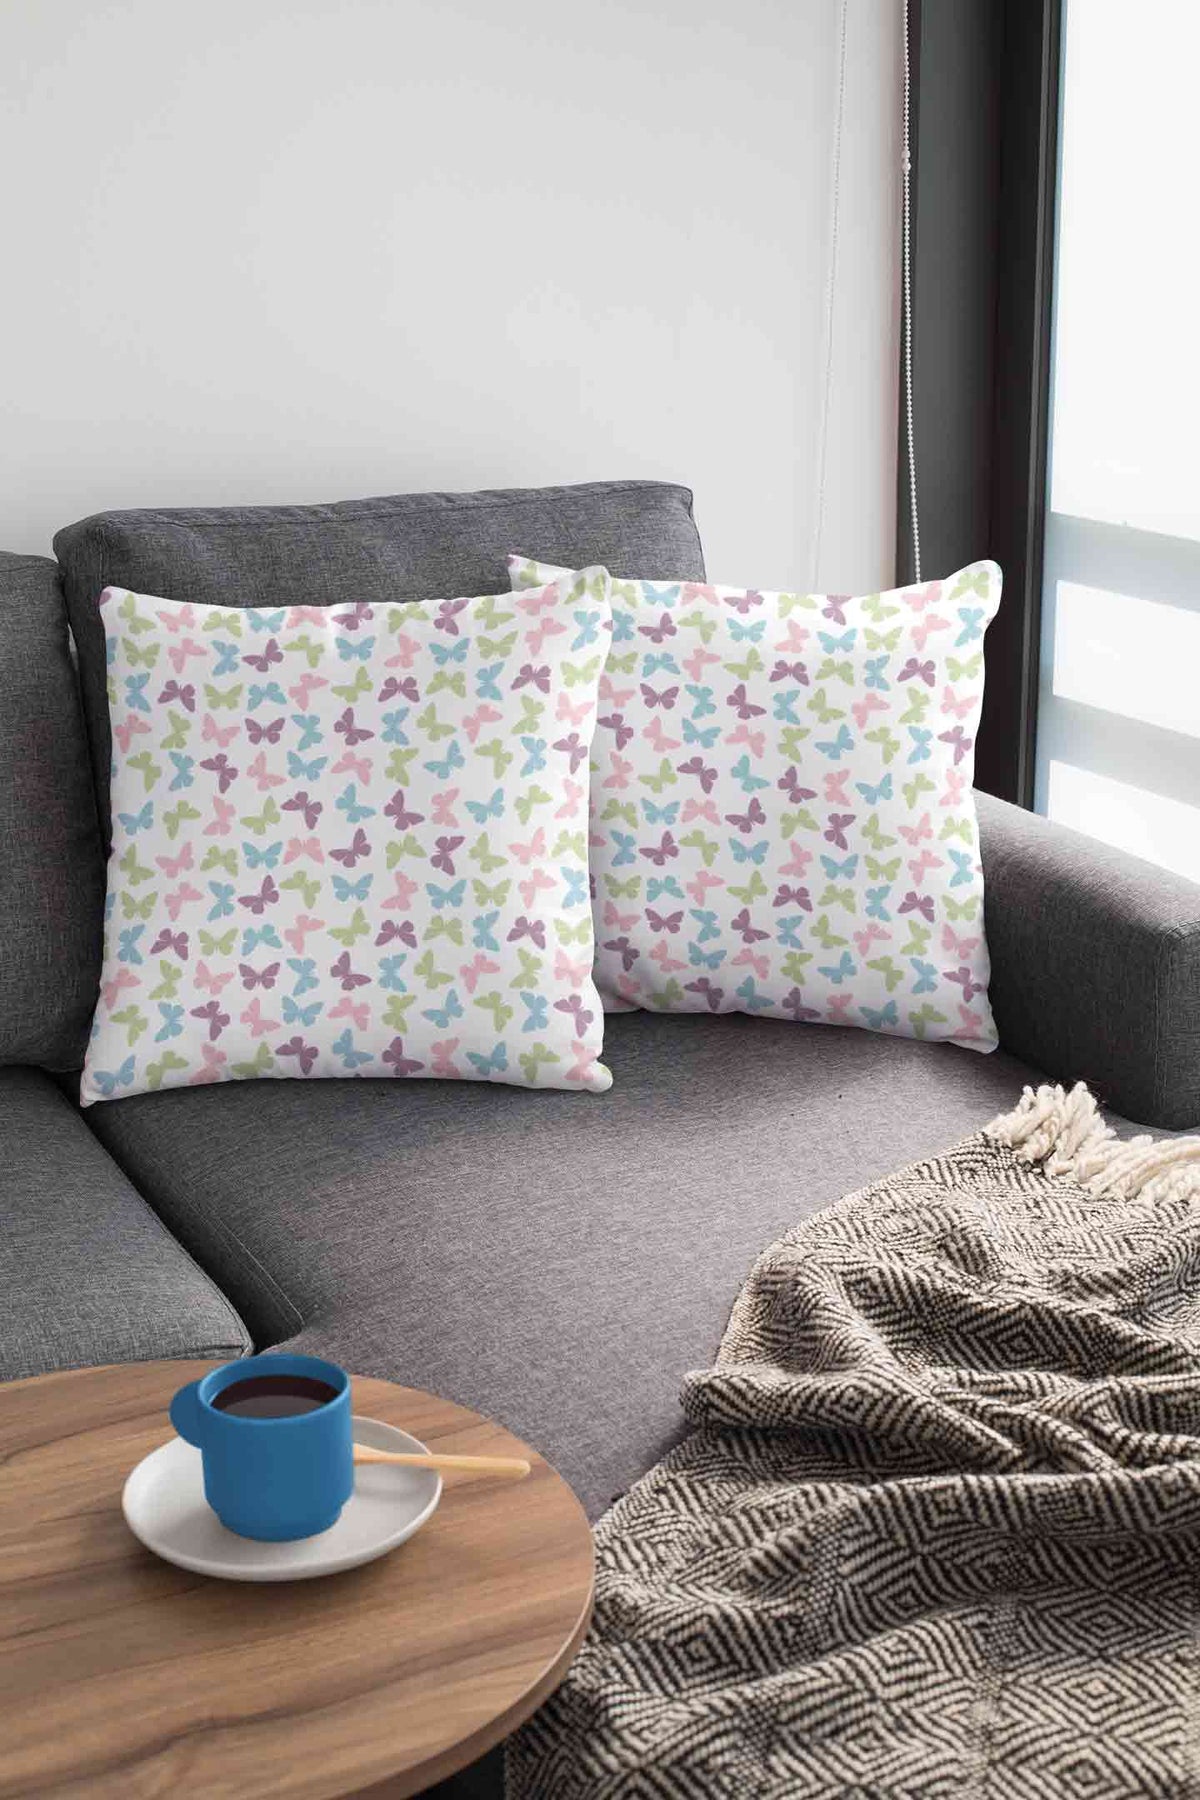 Stepevoli Cushion Covers - All About Butterflies Cushion Cover